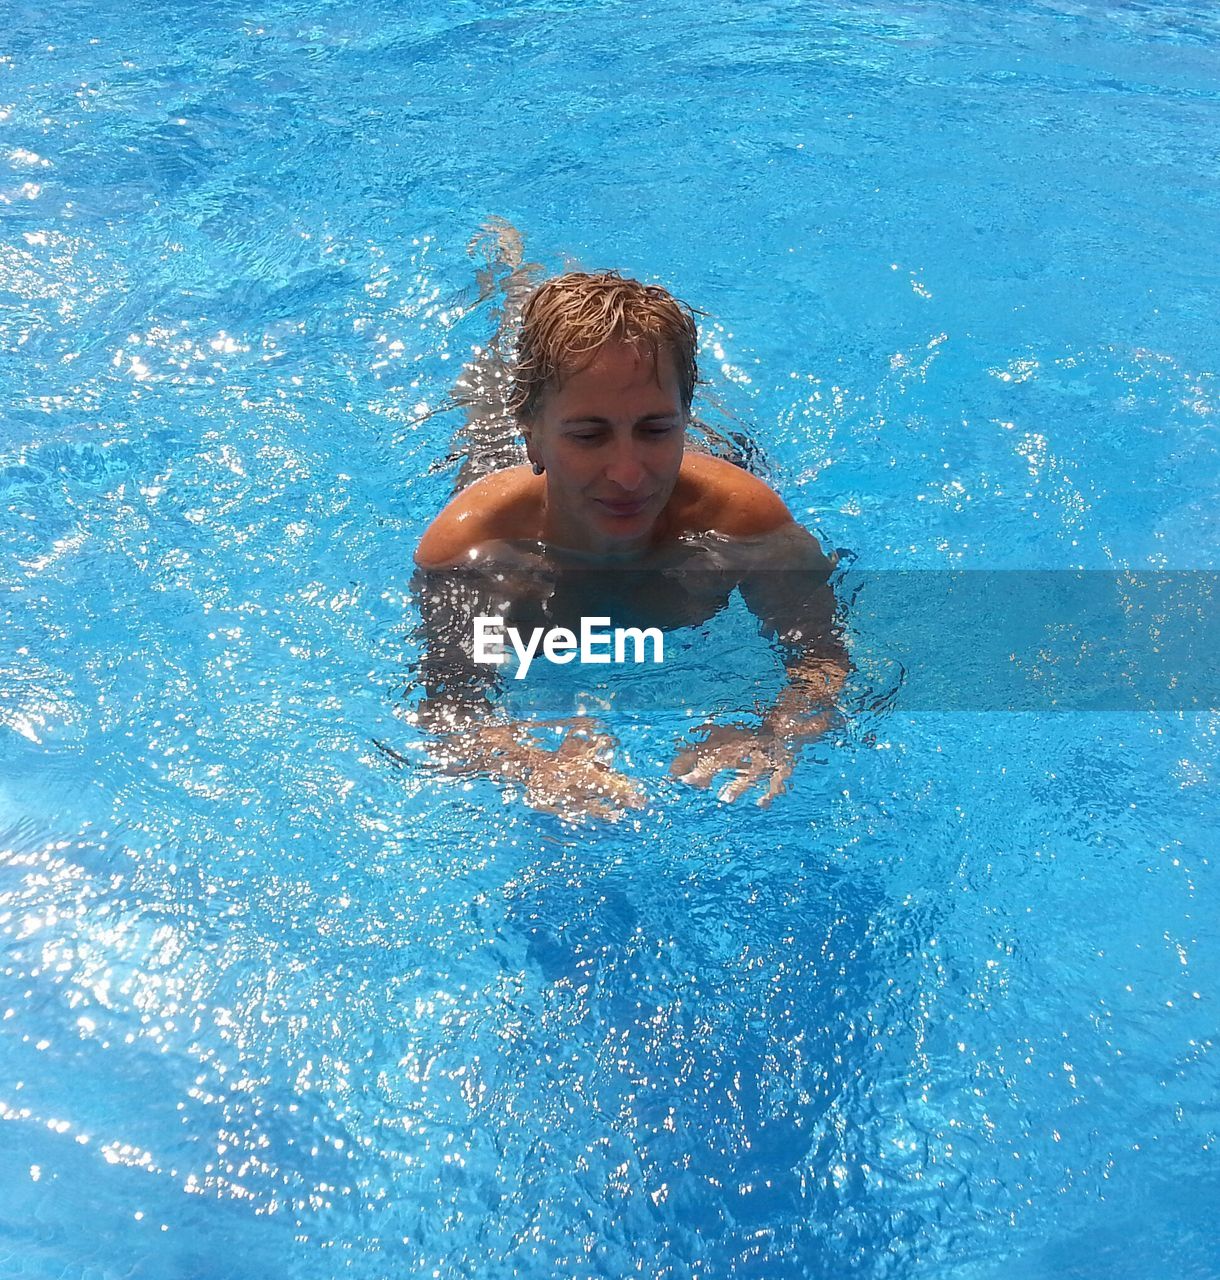 PORTRAIT OF SHIRTLESS YOUNG MAN SWIMMING IN POOL